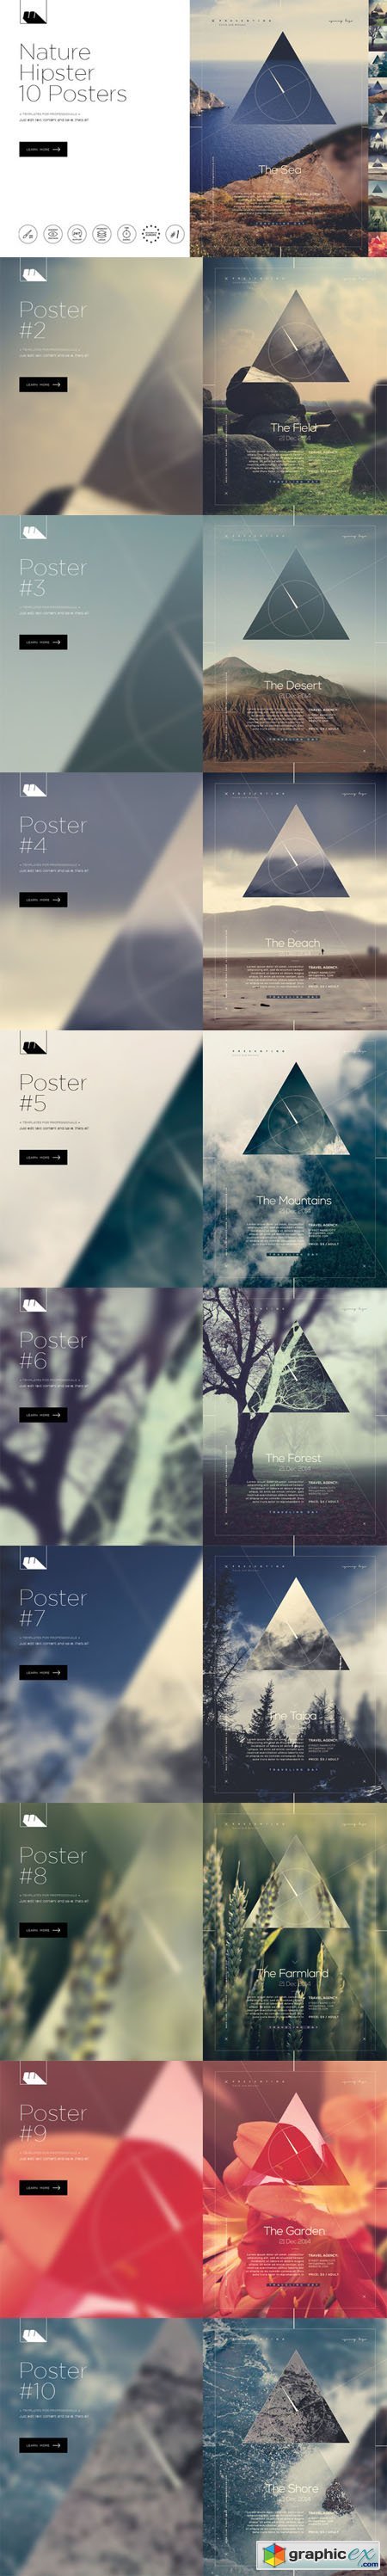 Hipster Nature 10 Posters